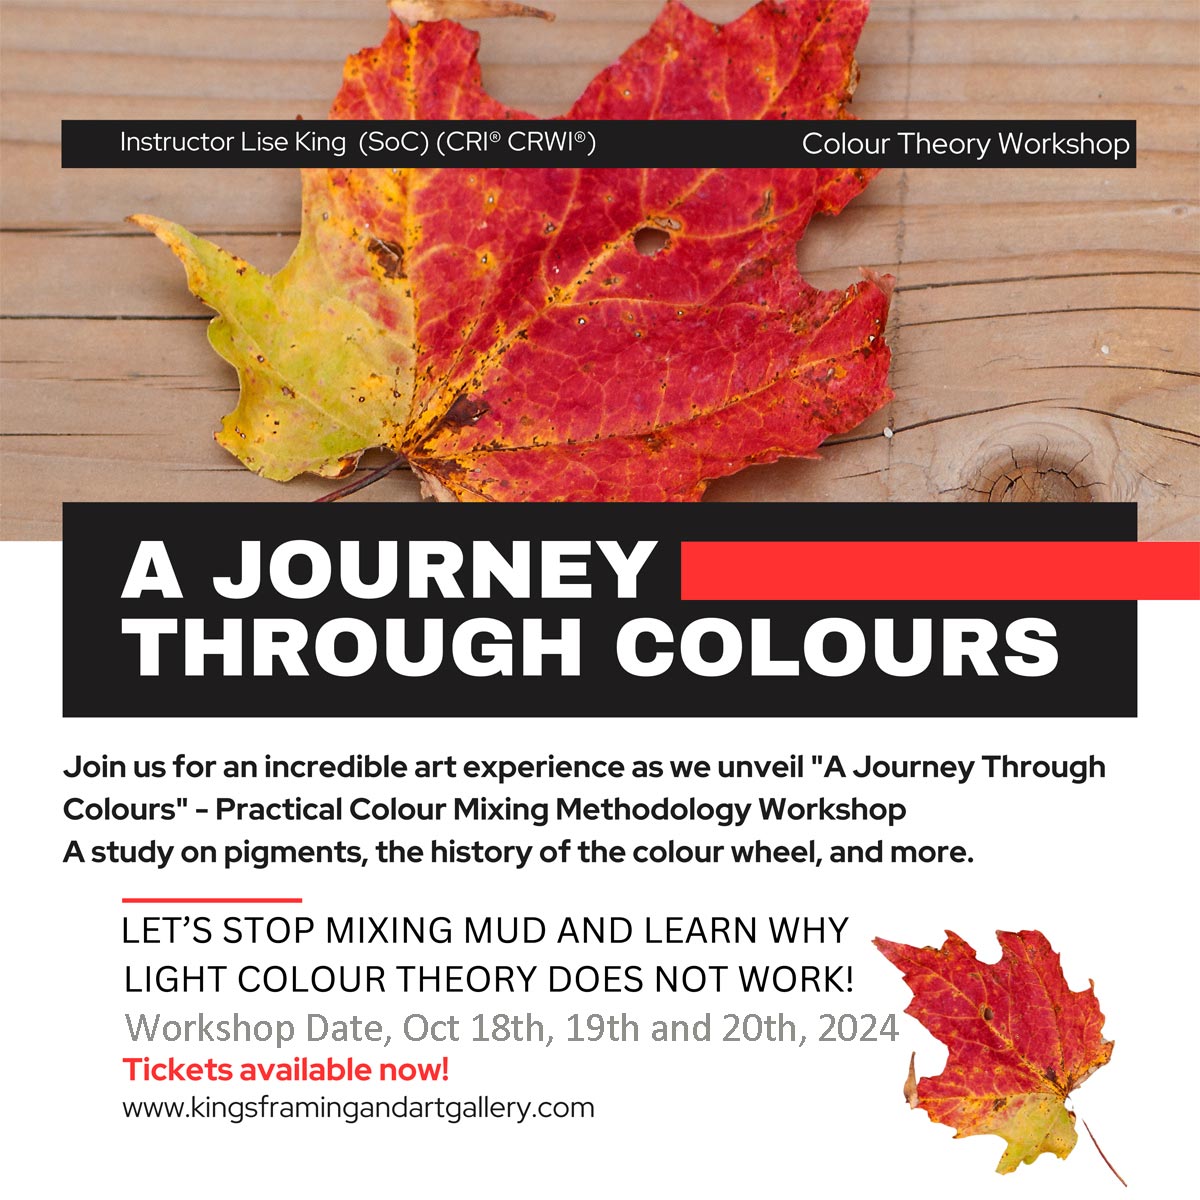 Practical Colour Mixing Methodology Workshop, Oct 18th, 19th and 20th, 2024